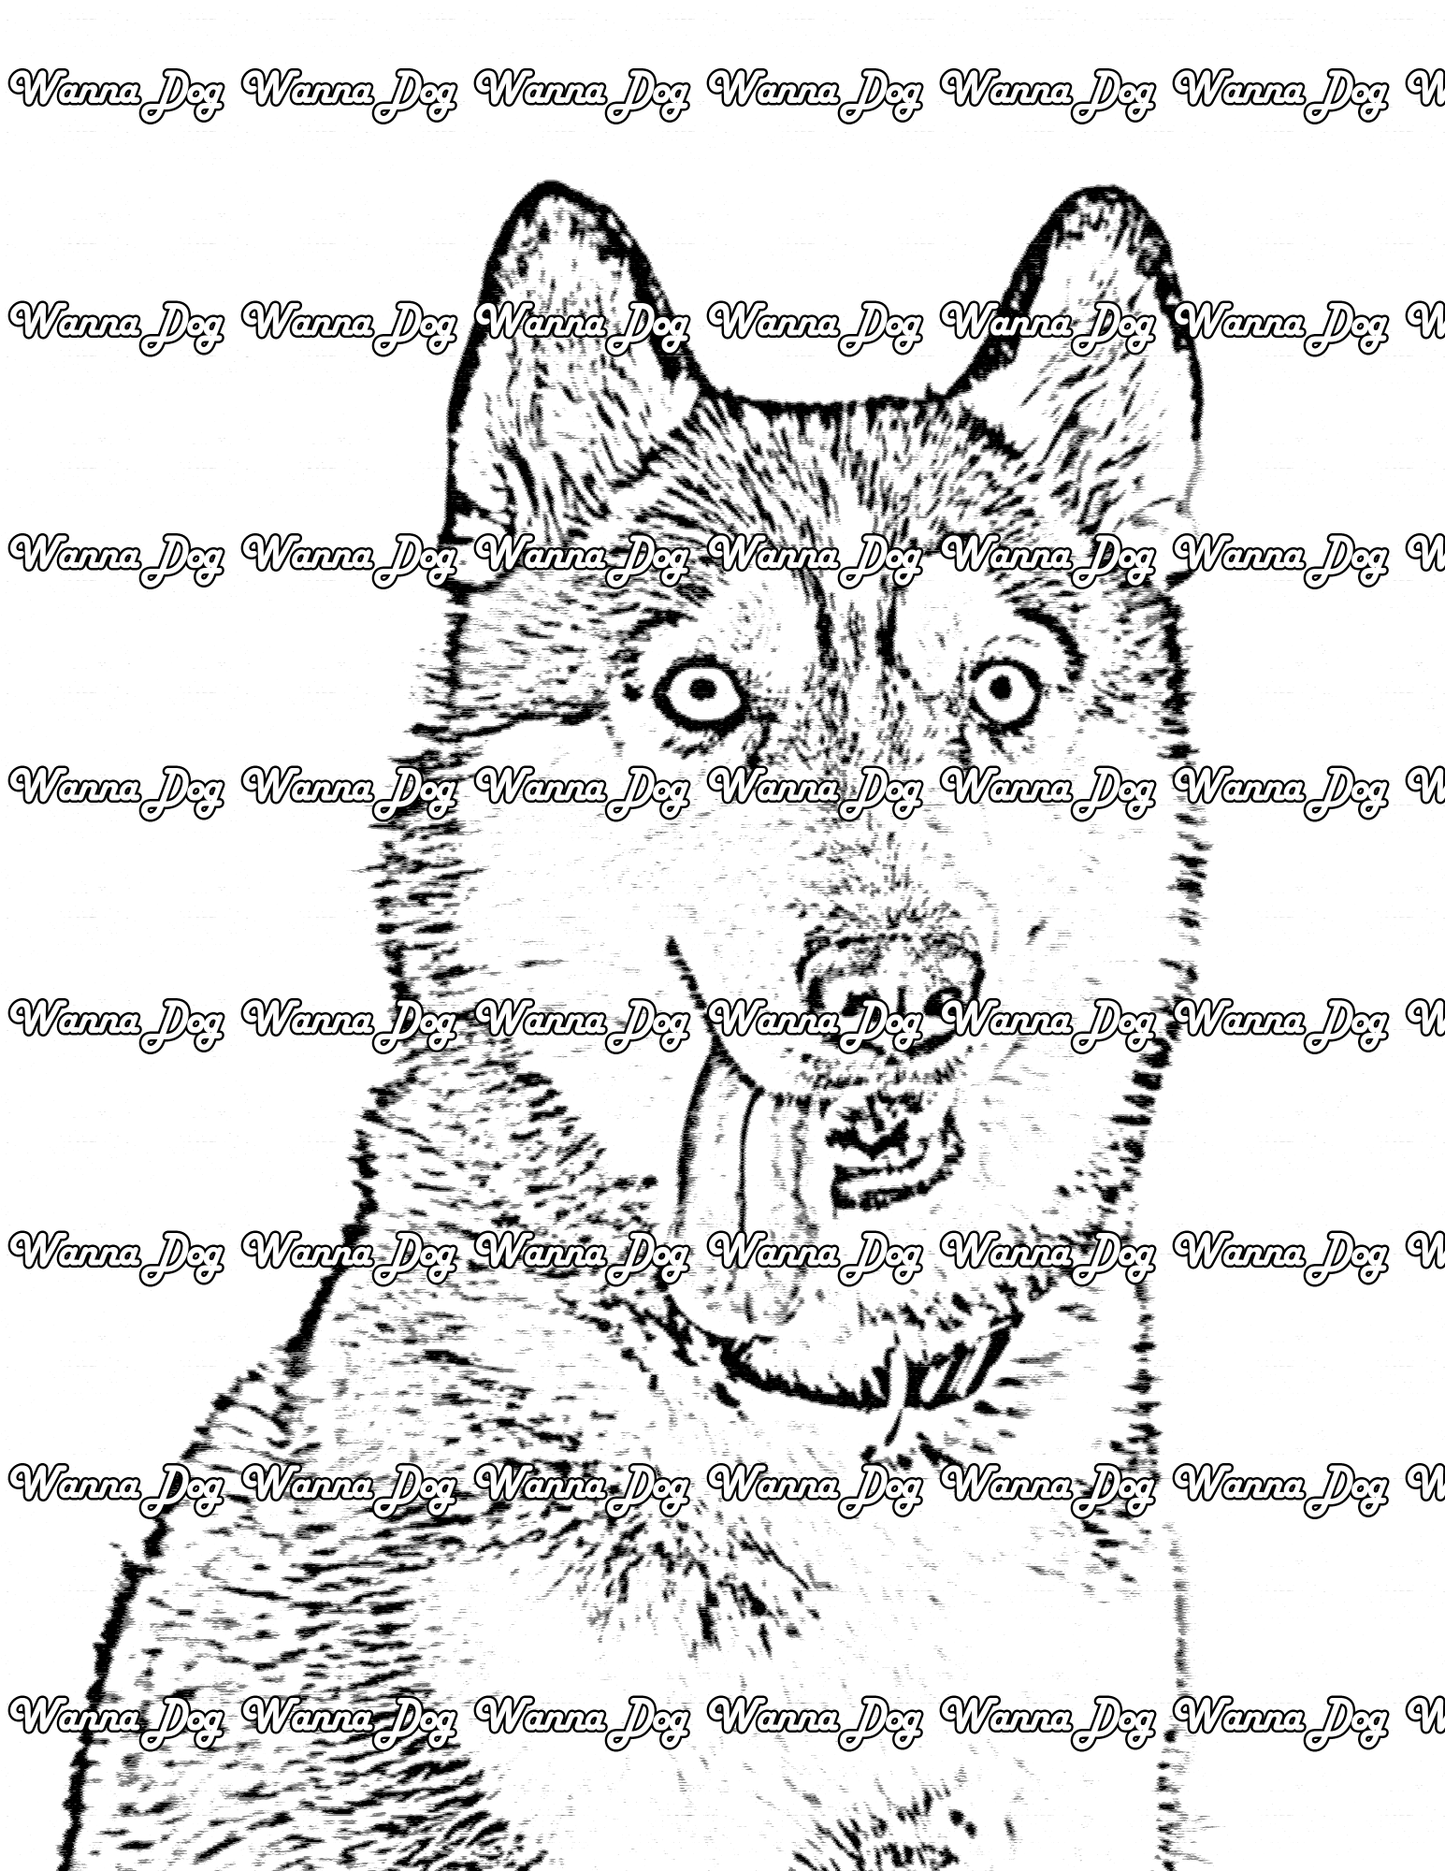 Siberian Husky Coloring Page of a Siberian Husky with their tongue out and sitting